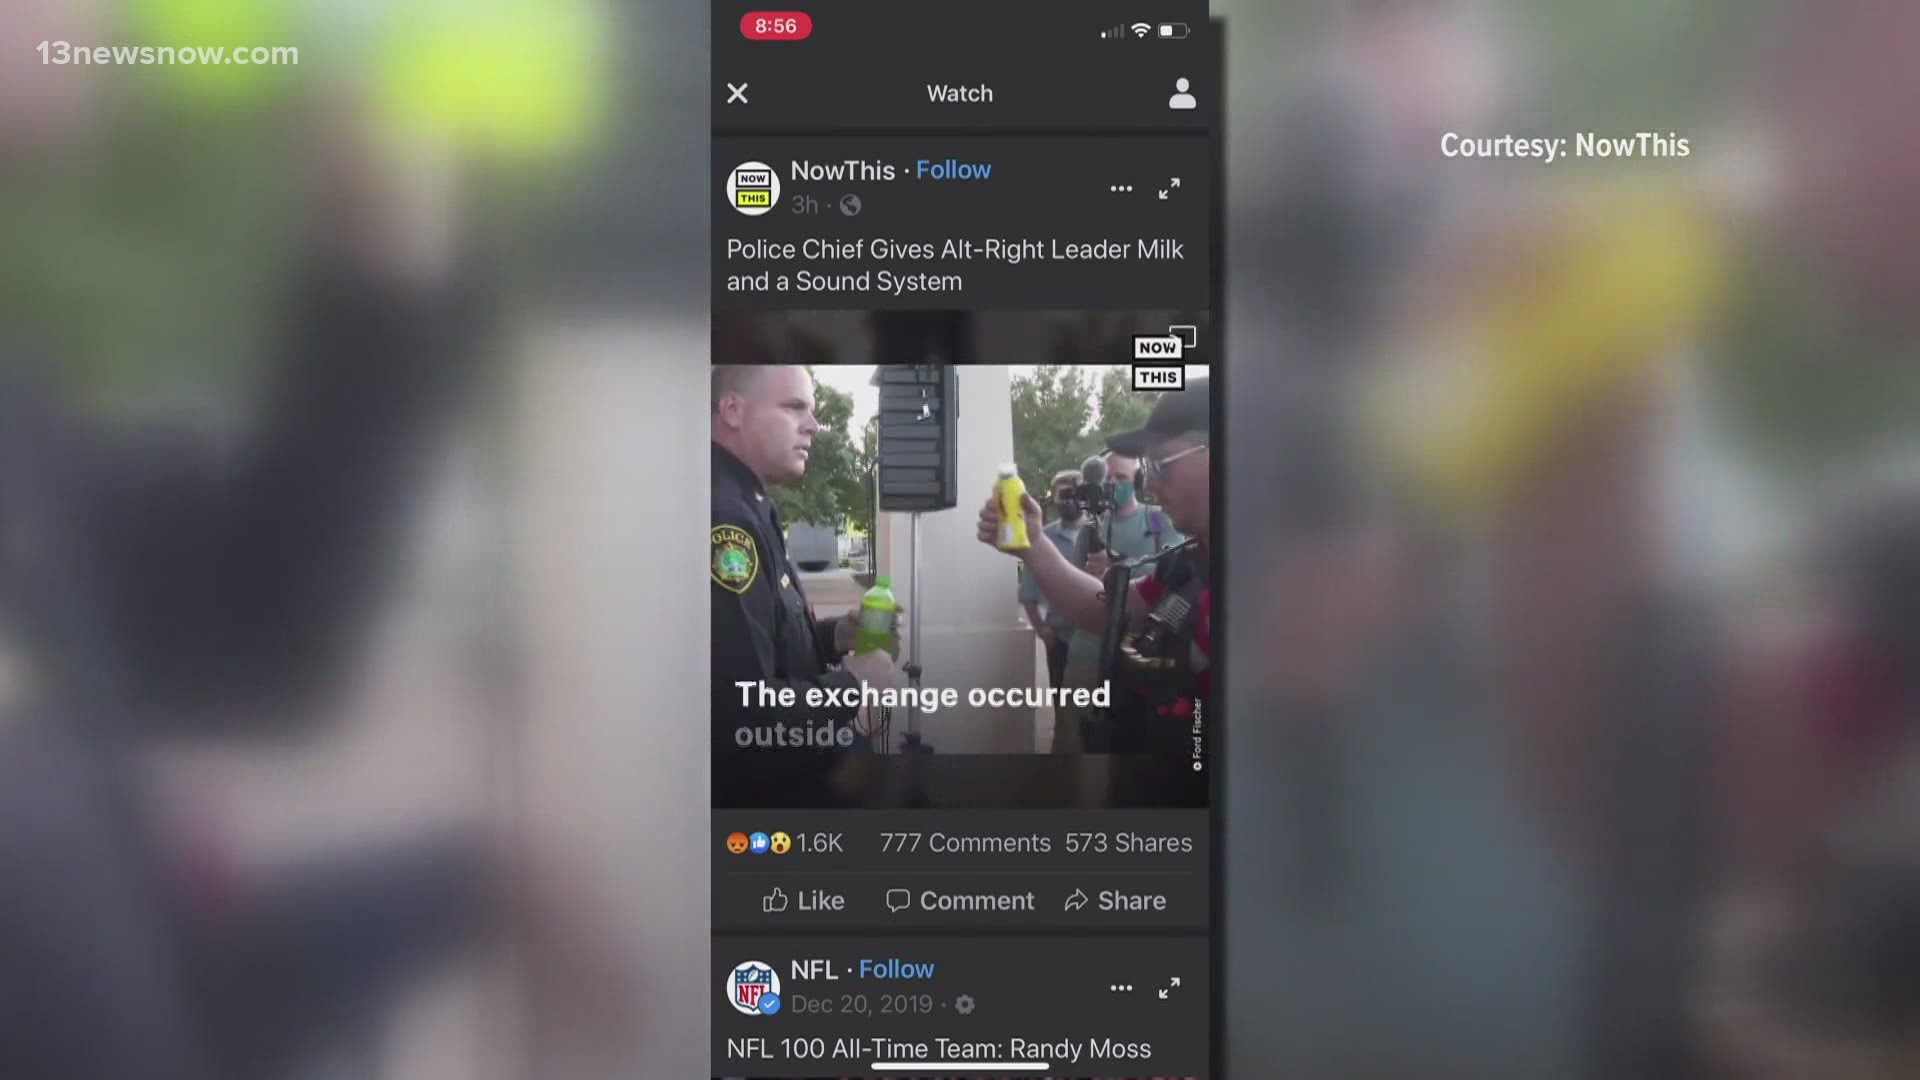 13News Now Niko Clemmons got answers from Newport News Police Chief Steve Drew after a social media clip circulated showing him speaking with far-right extremists.